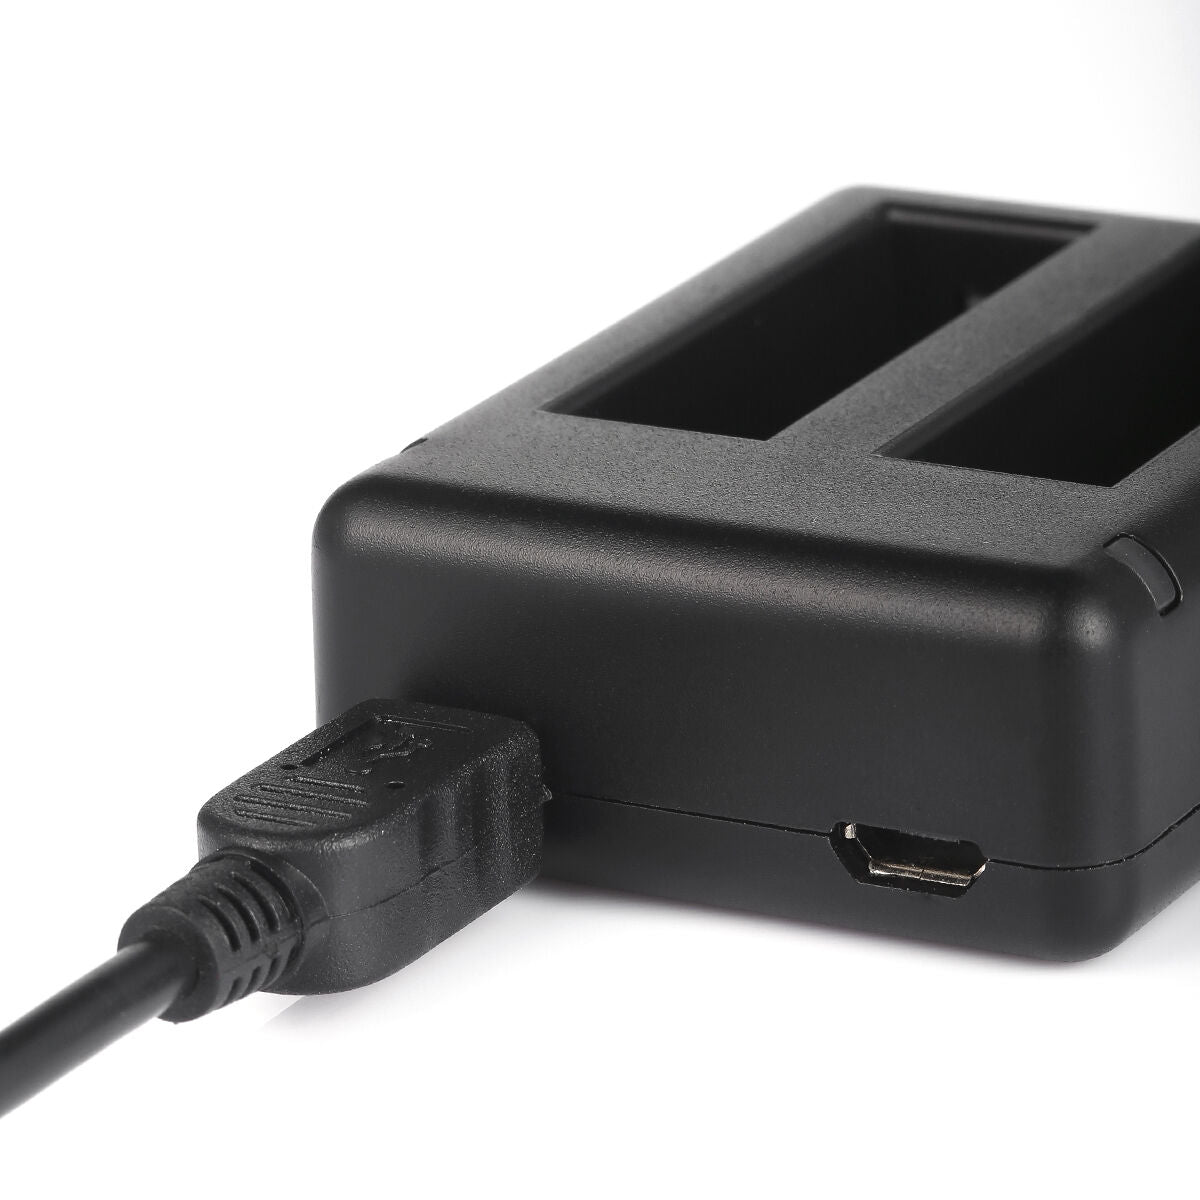 Dual Charger For GoPro AHDT401 AHDBT-401